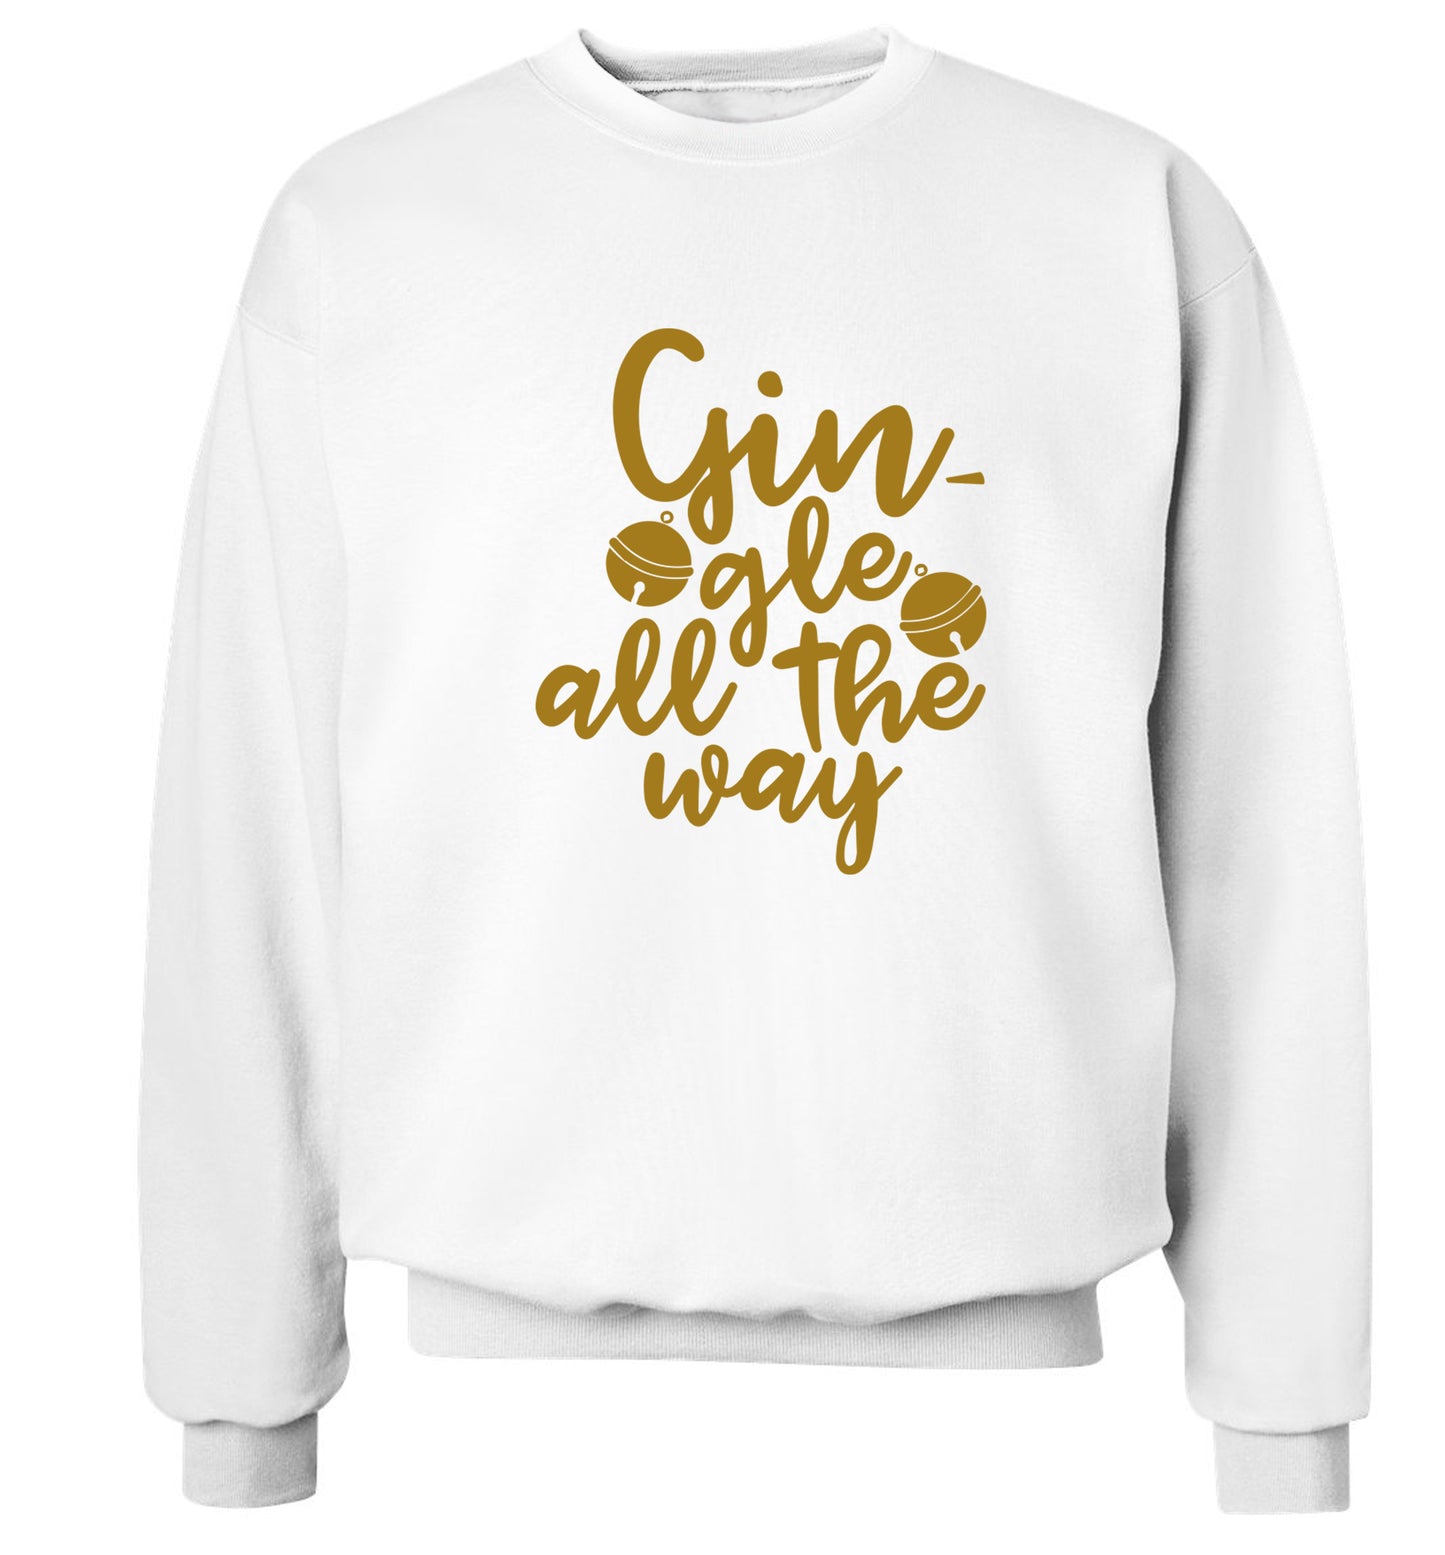 Gin-gle all the way Adult's unisex white Sweater 2XL